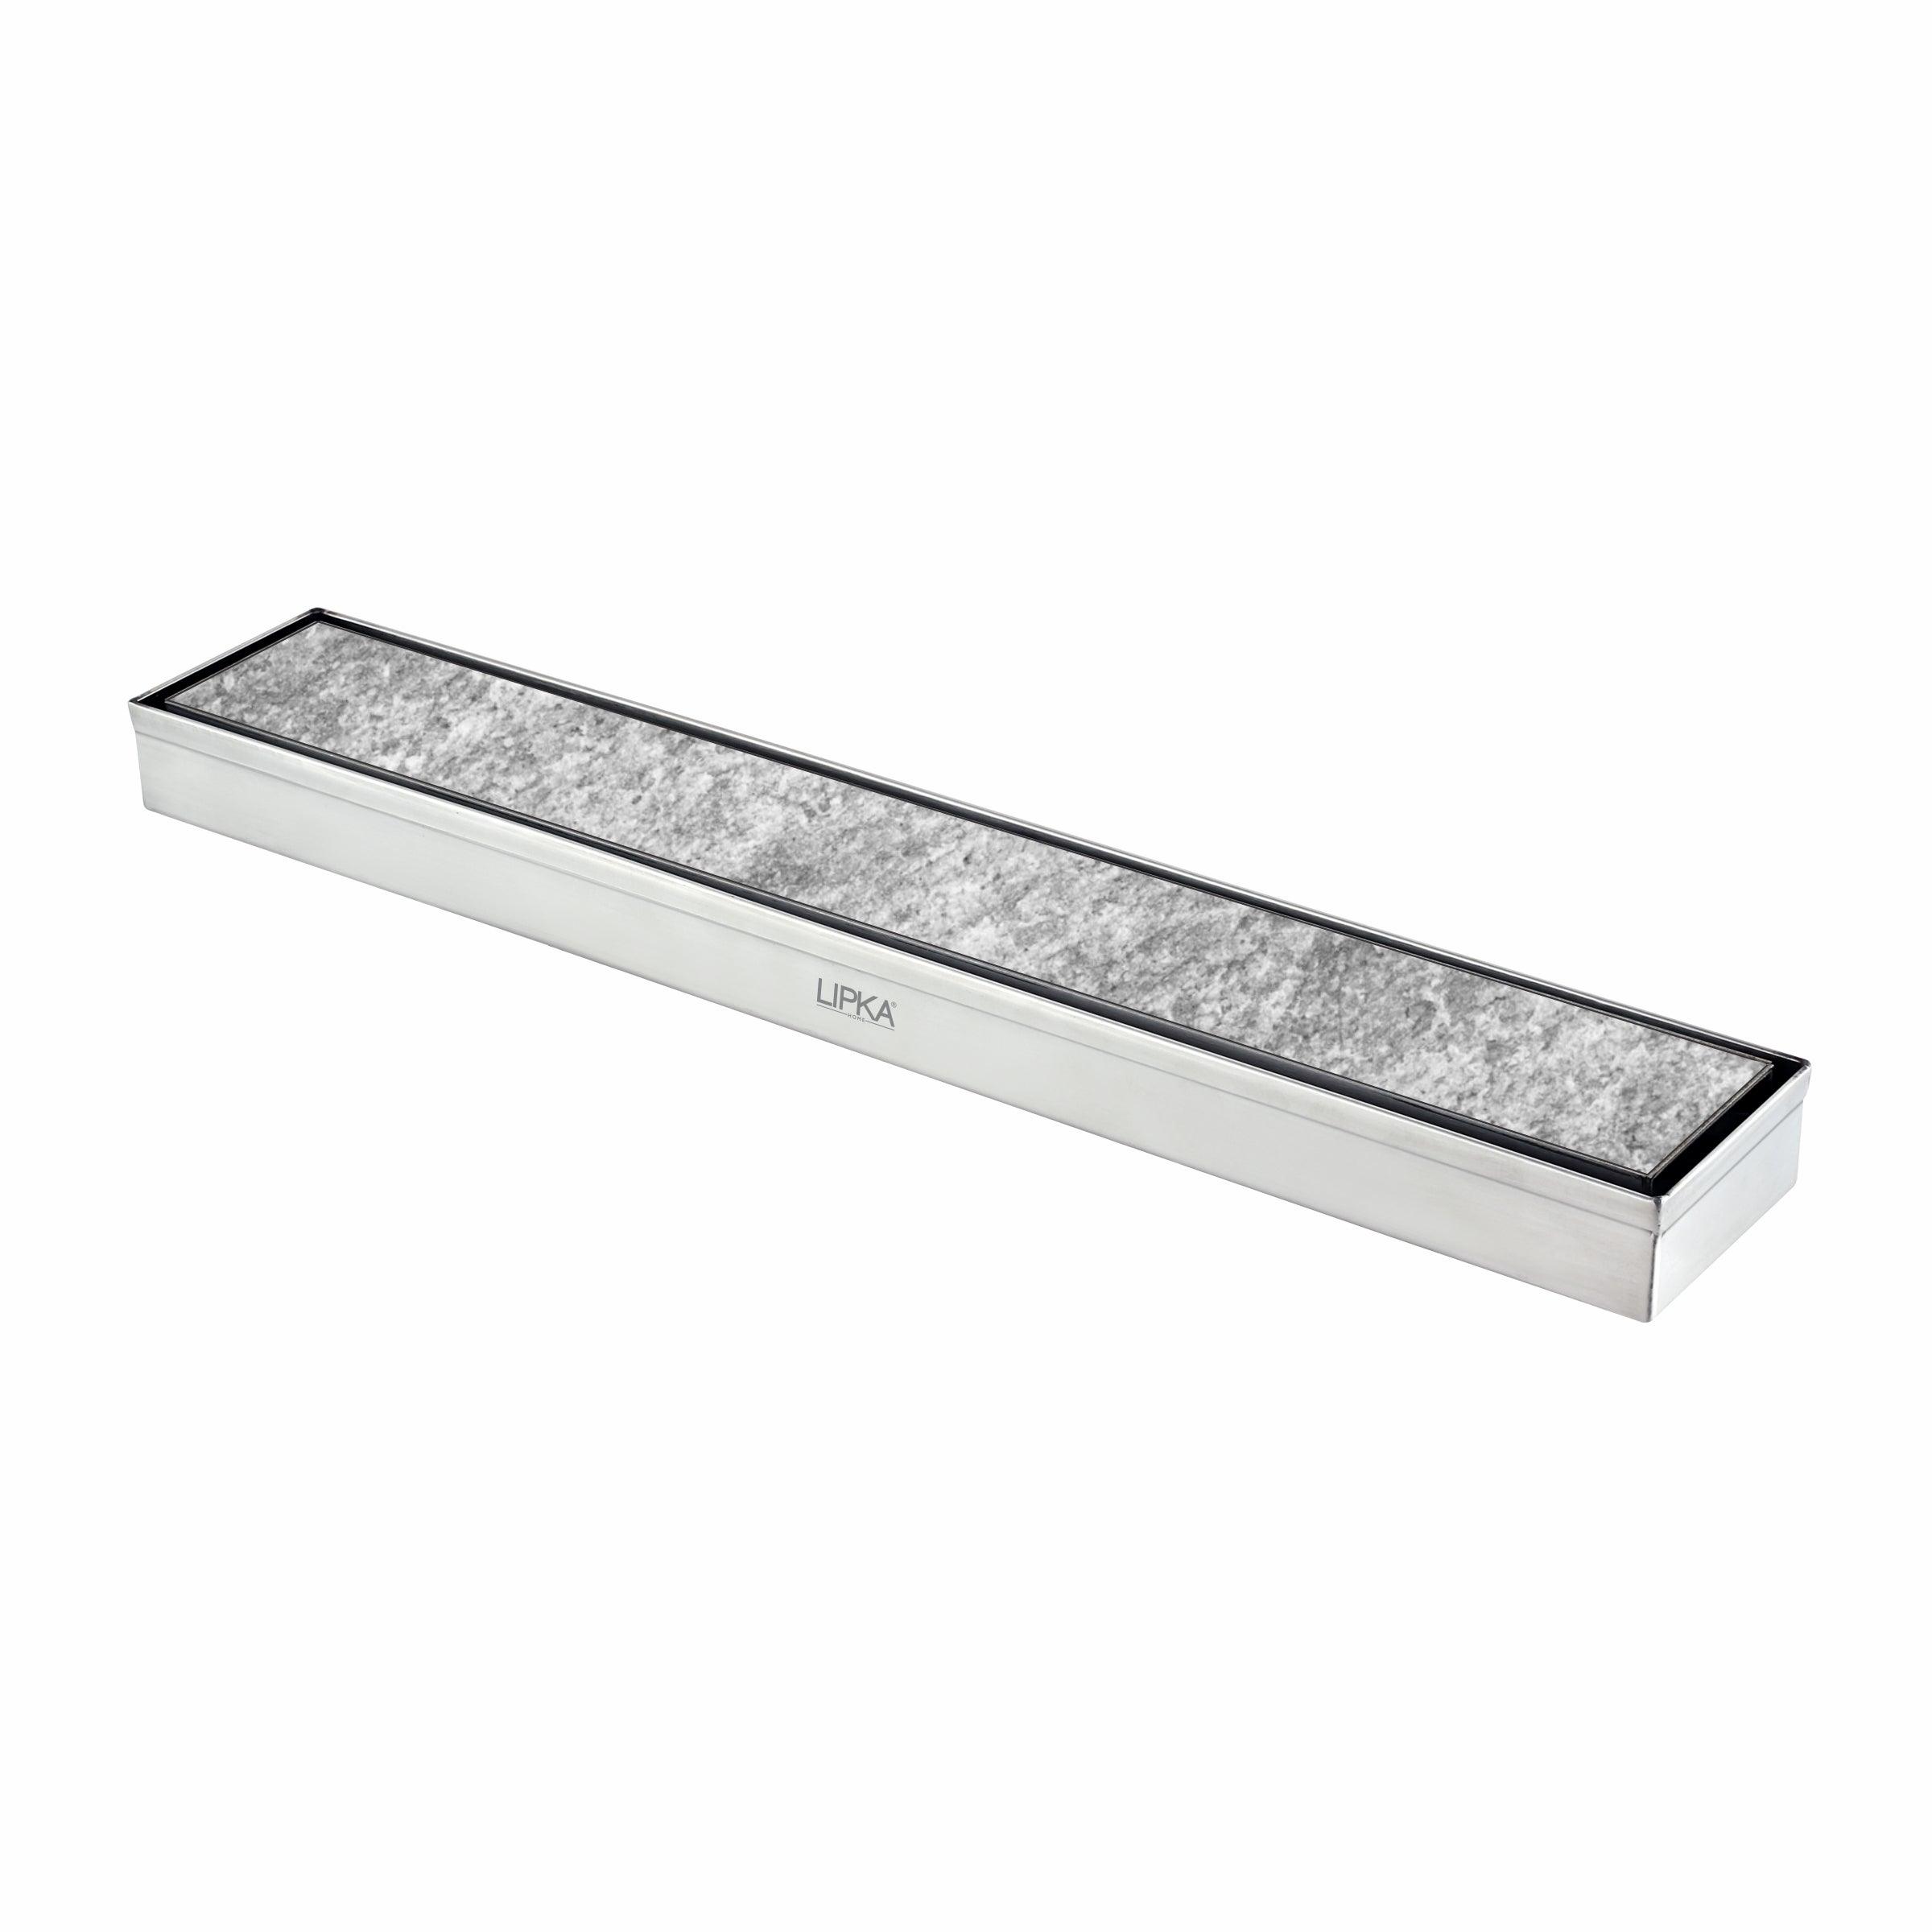 Tile Insert Shower Drain Channel (24 x 2 Inches)